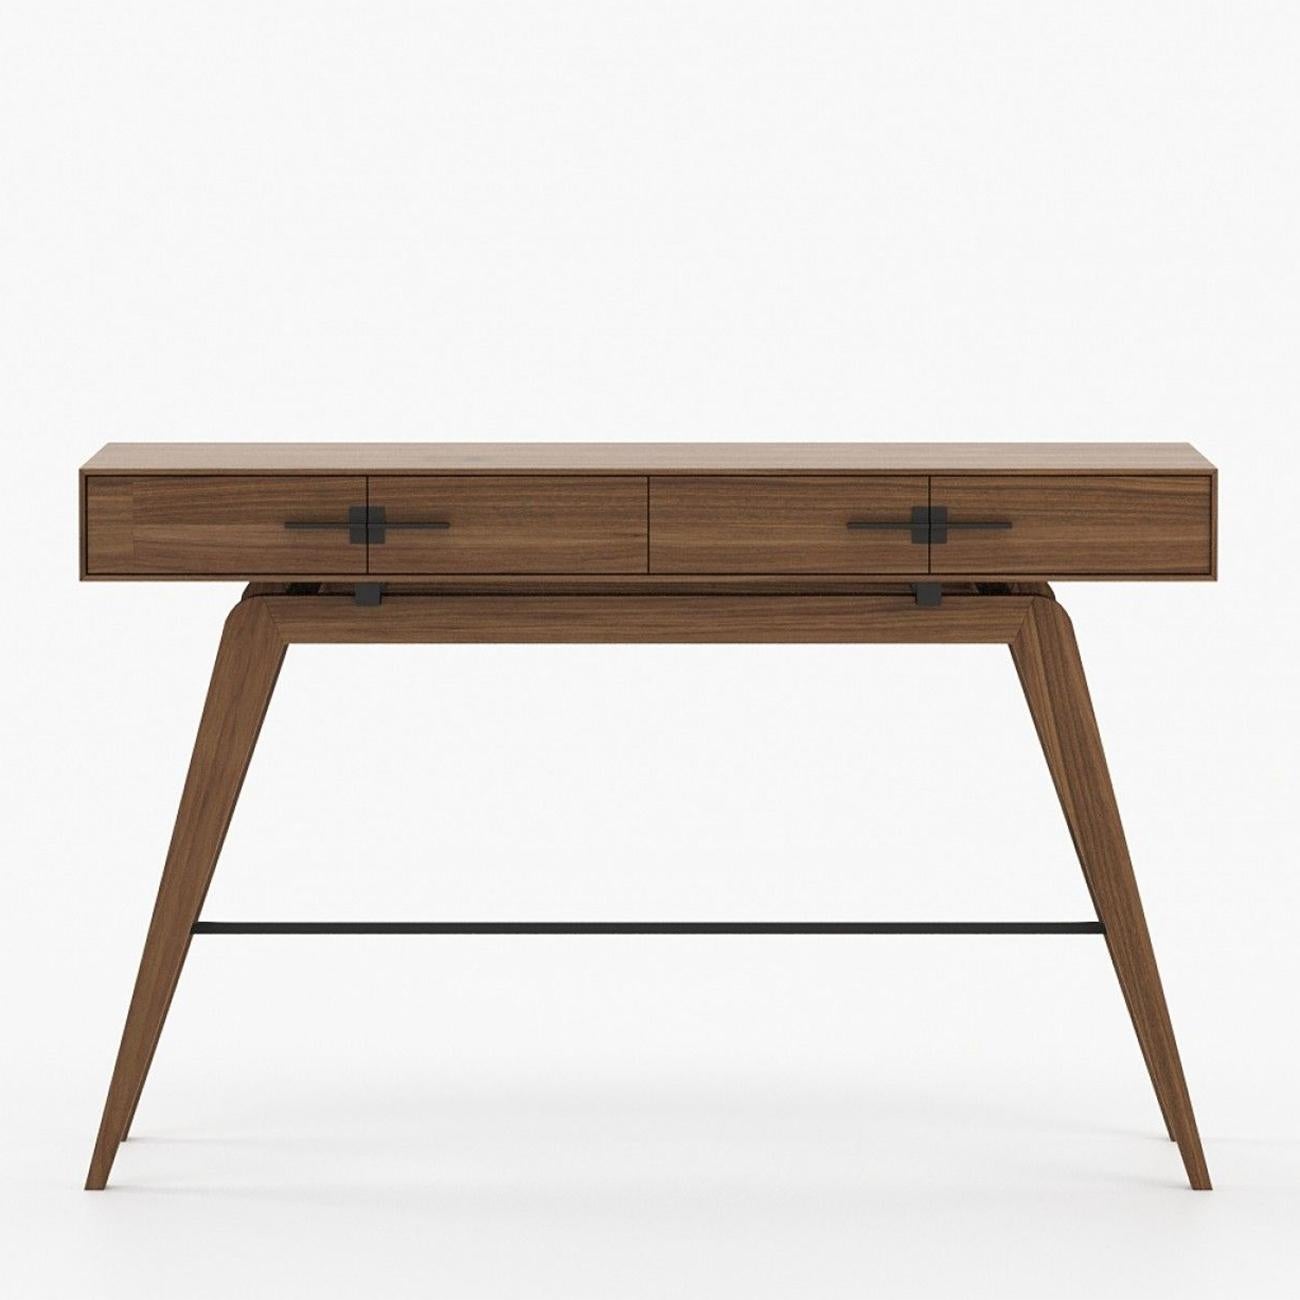 Console table Ostel walnut with wooden structure in walnut
matte fiinsh, with iron details and handles in black matte finish.
Console with 4 drawers with easy glide system.
Also available on request in grey oak matte, or in natural oak, or